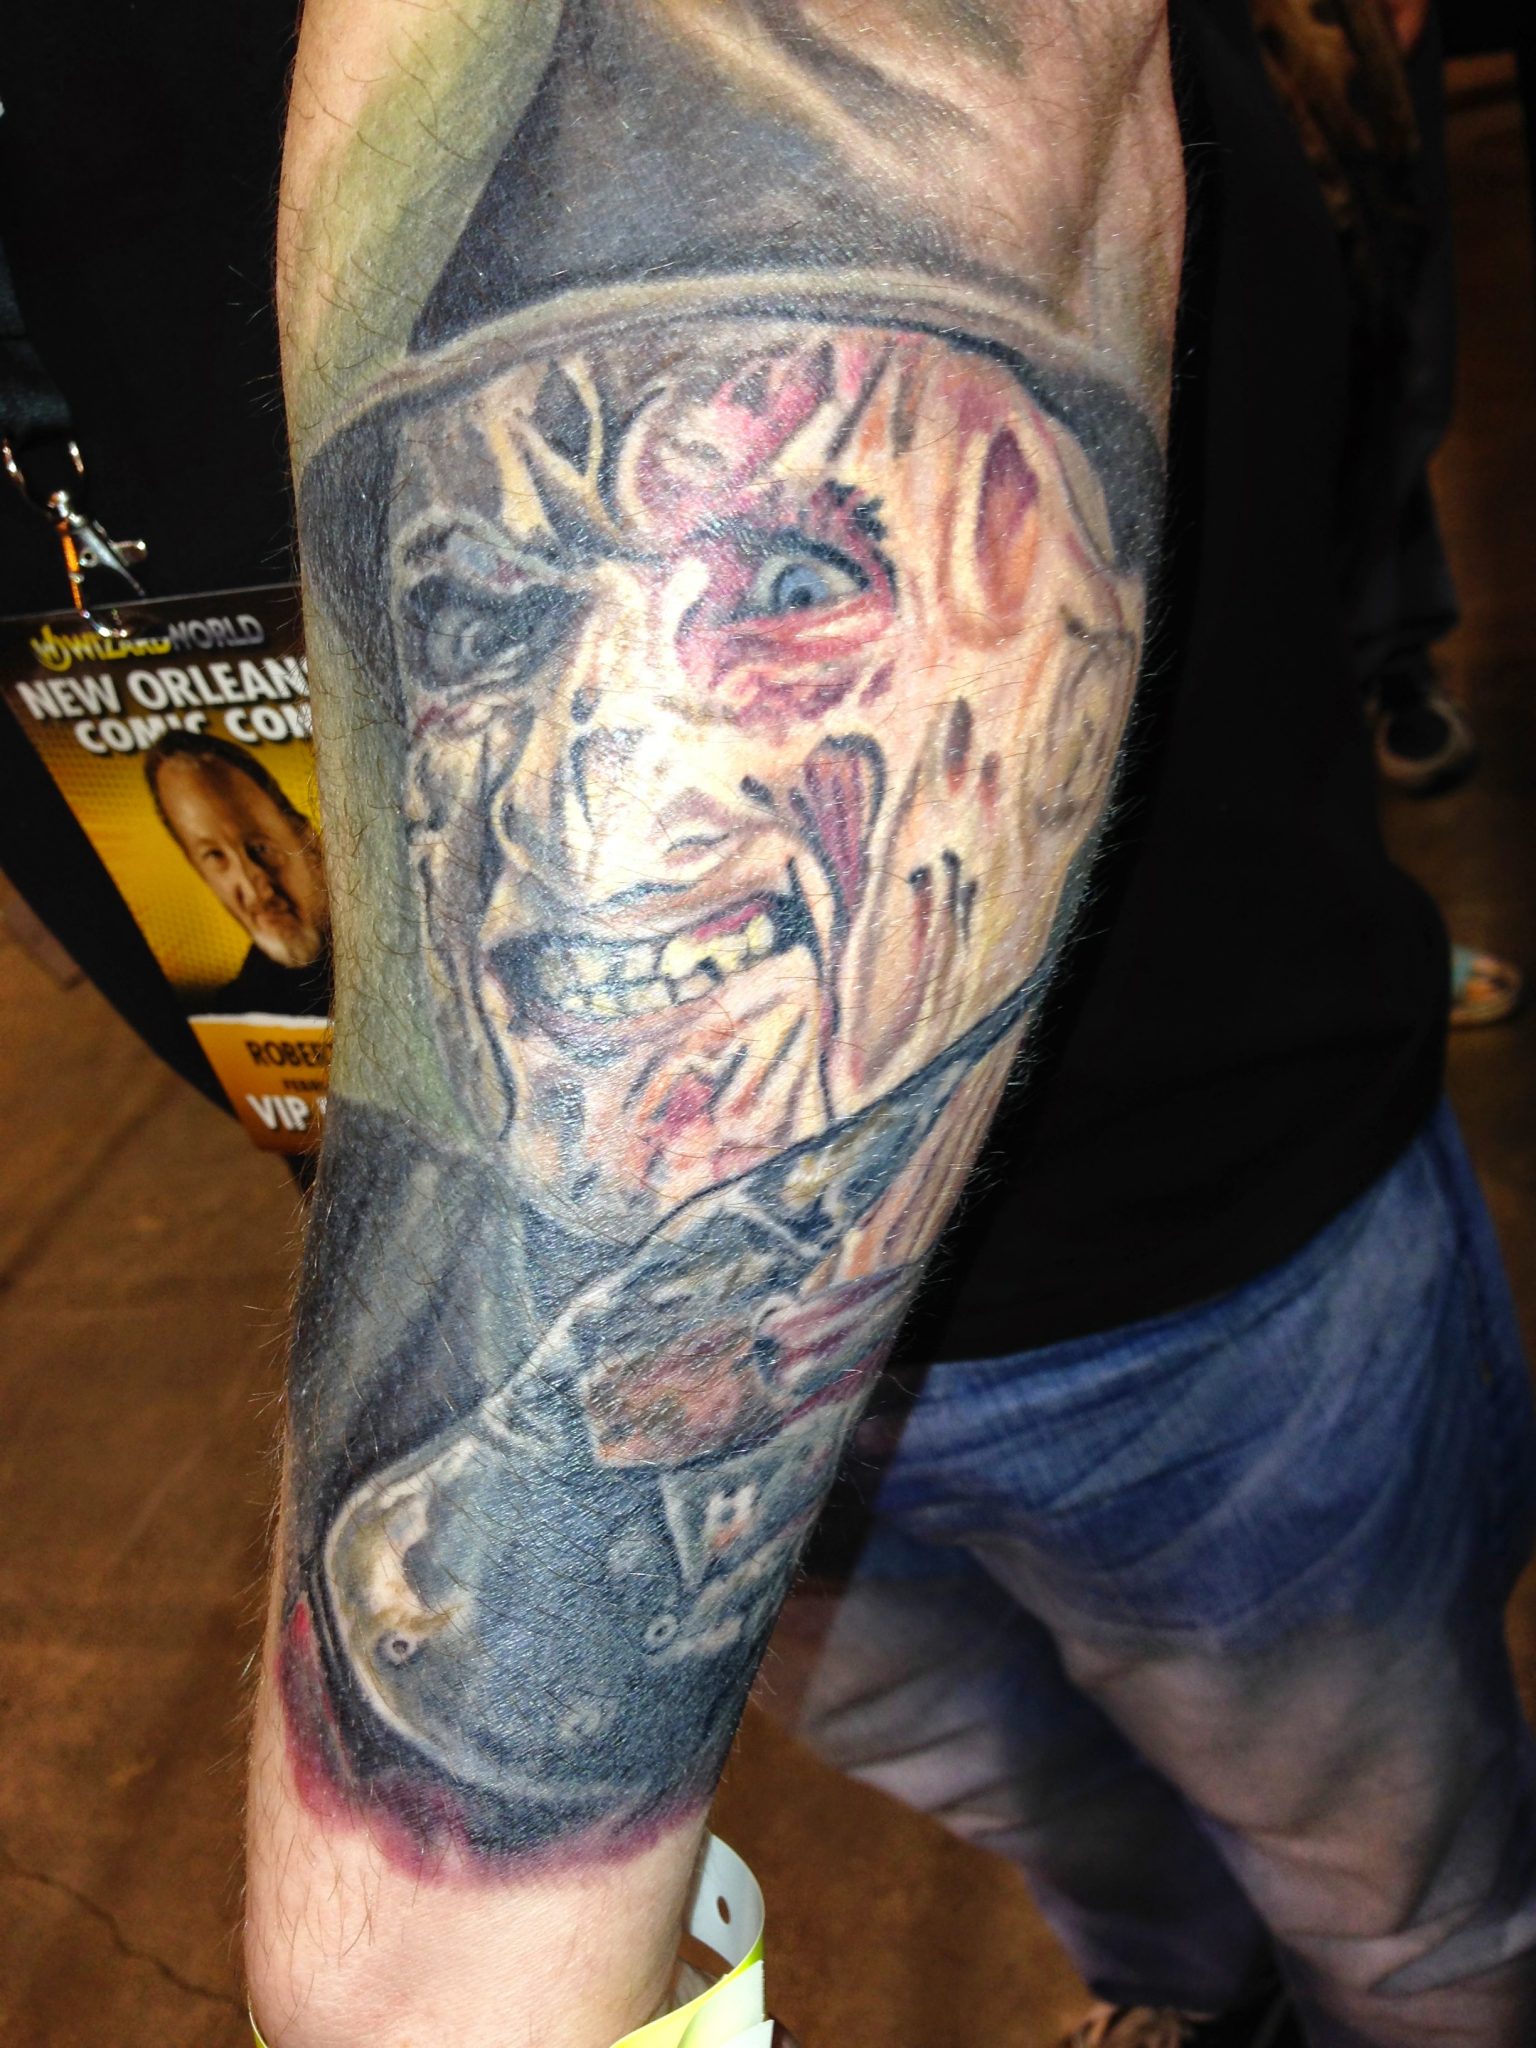 Crypt keeper tattoo done by  Total Commitment Tattooing  Facebook